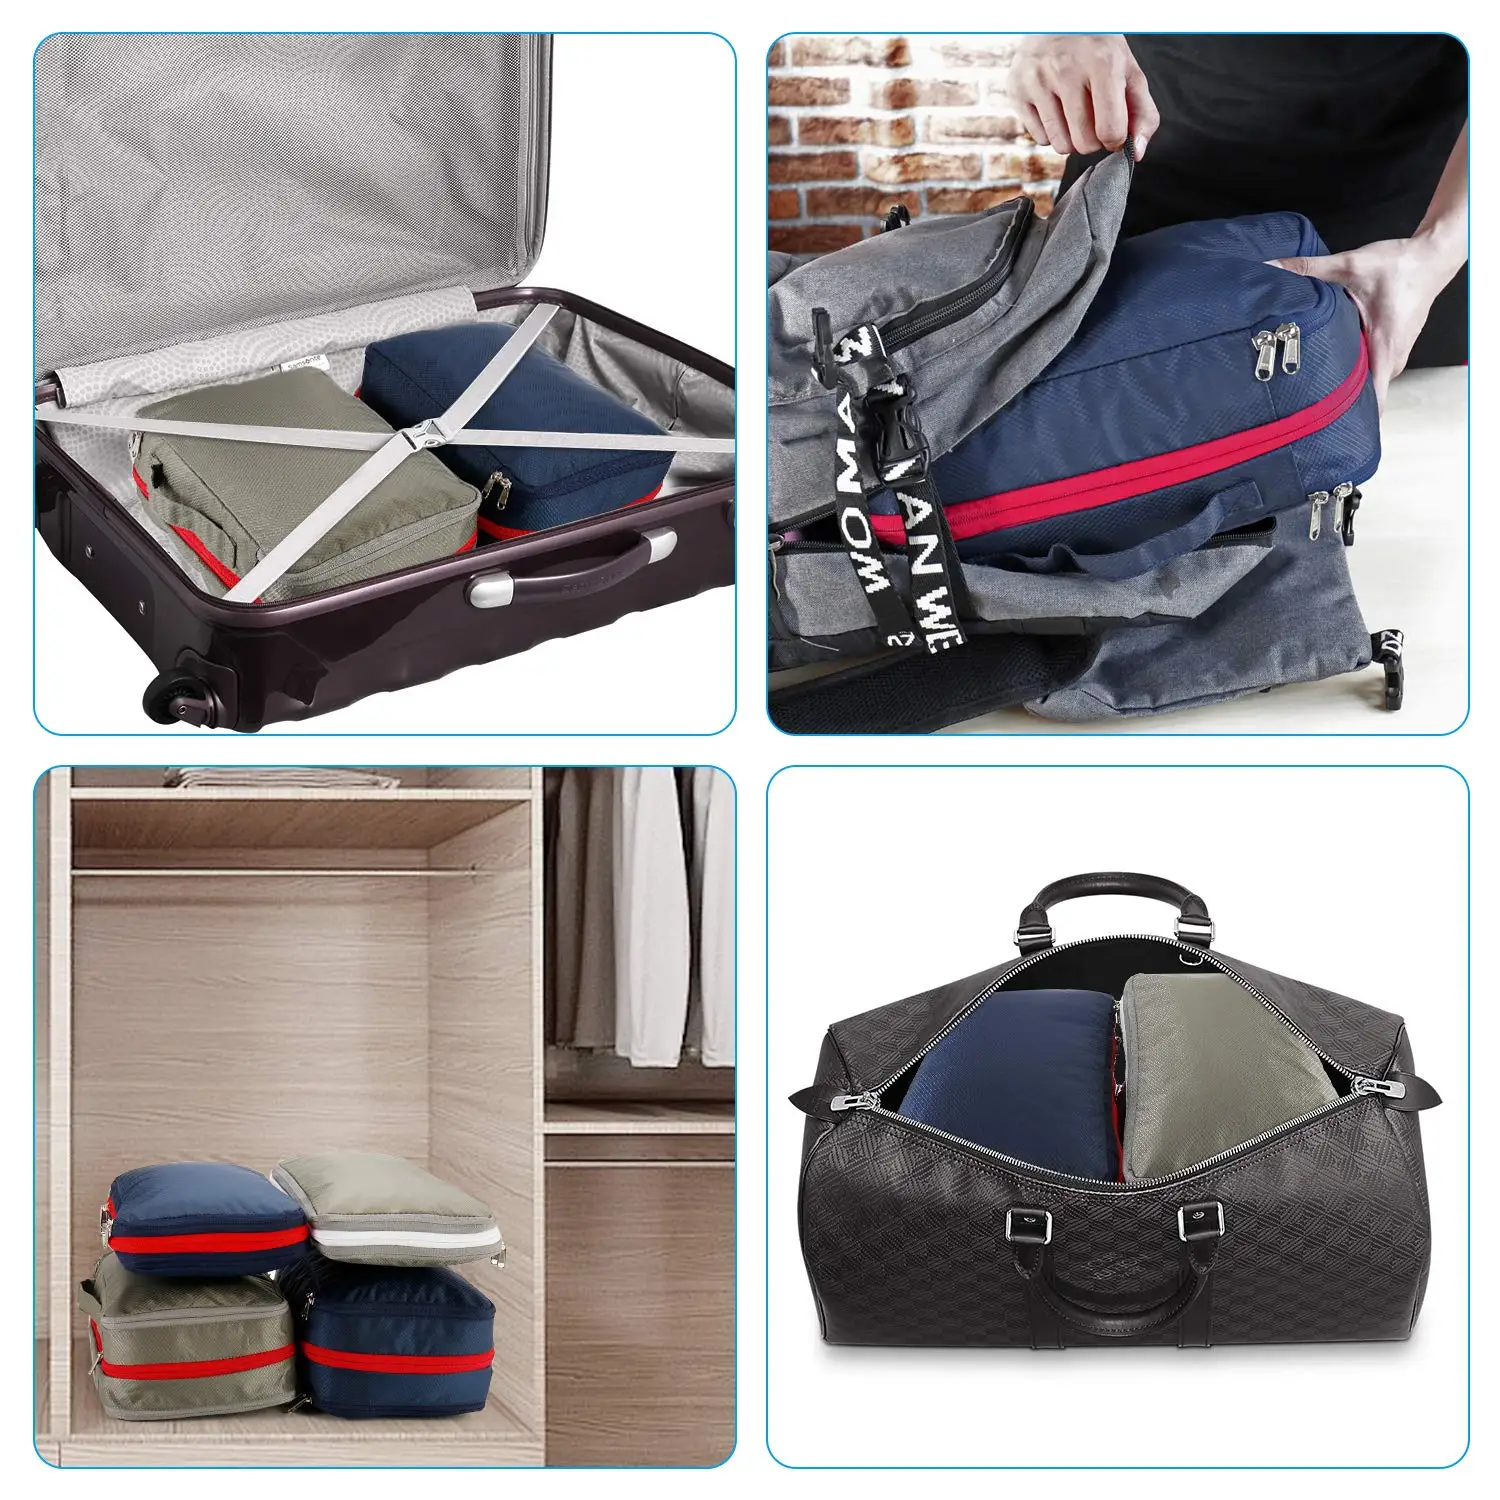 Dropship 9Pcs Clothes Storage Bags Water-Resistant Travel Luggage Organizer Clothing  Packing Cubes to Sell Online at a Lower Price